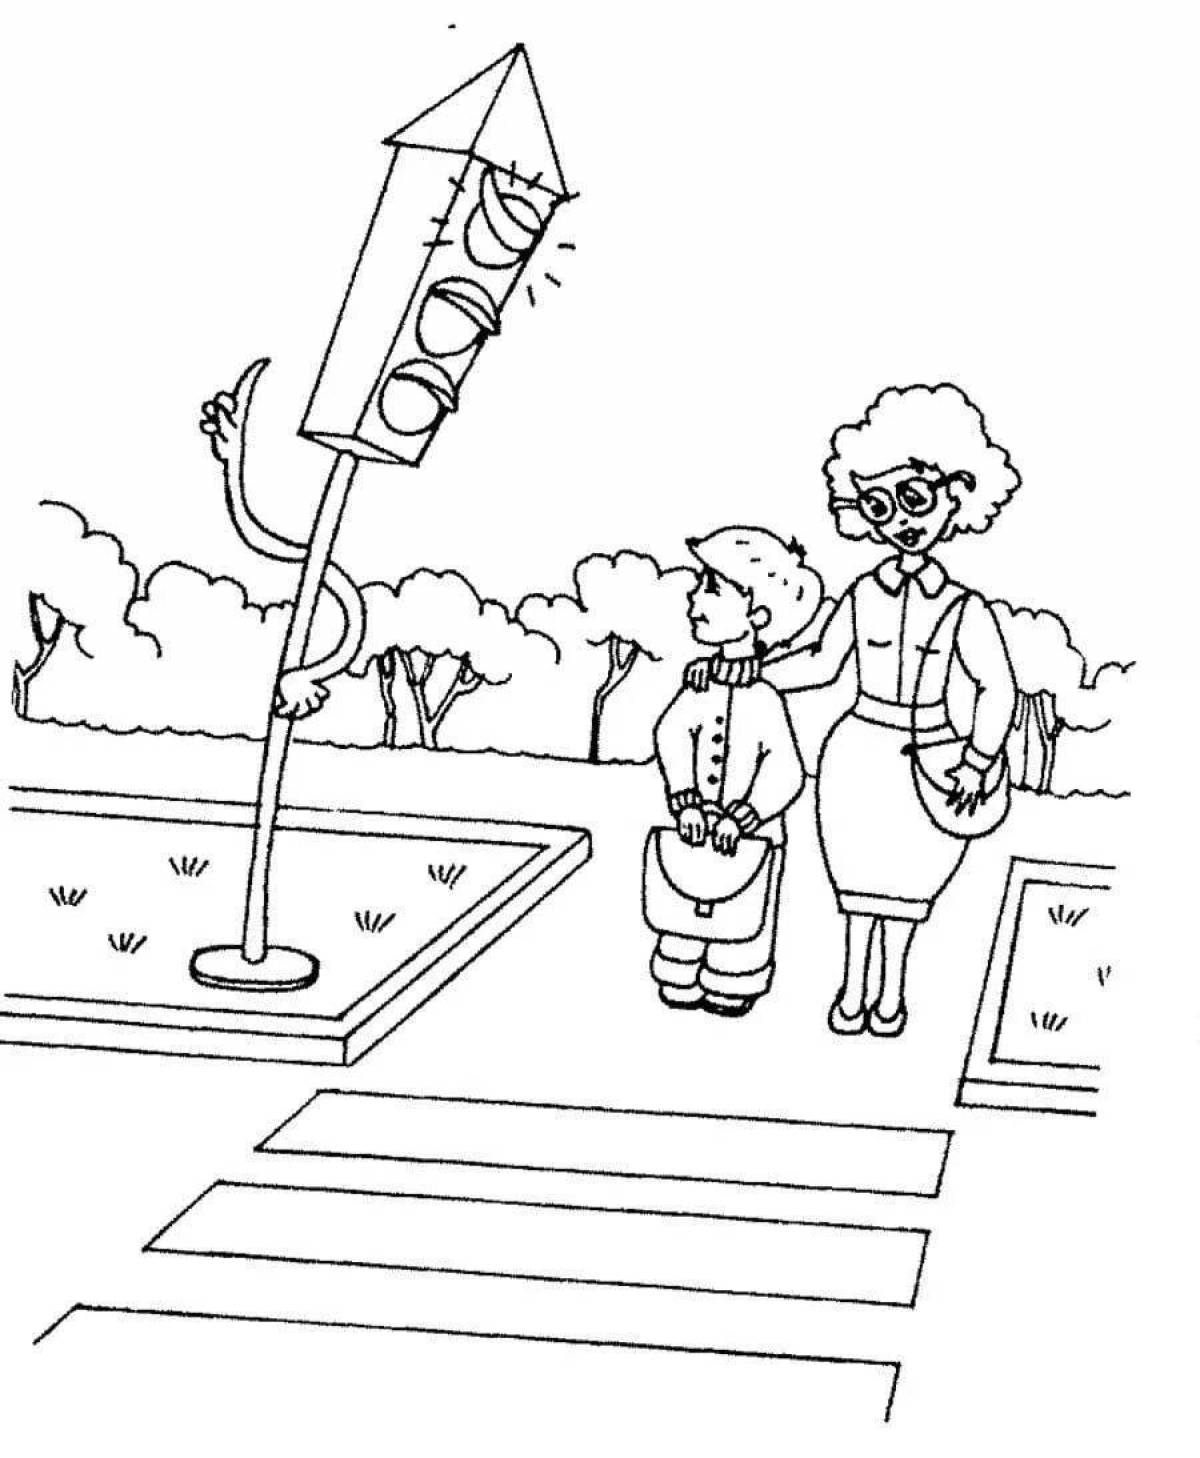 Fascinating road safety coloring book for schoolchildren